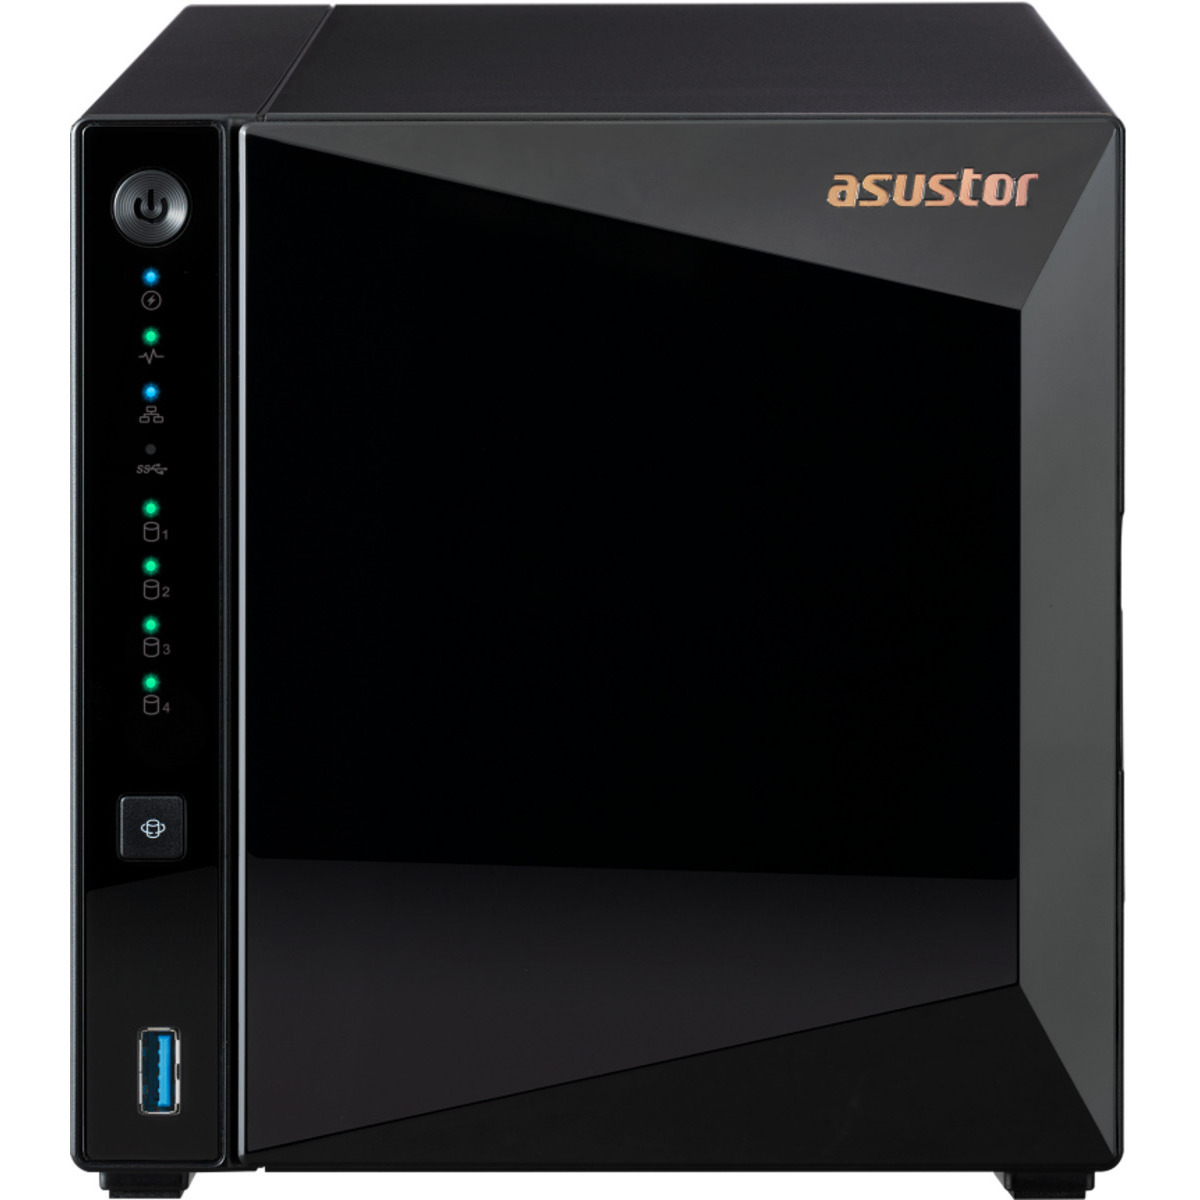 ASUSTOR DRIVESTOR 4 Pro Gen2 AS3304T v2 36tb 4-Bay Desktop Personal / Basic Home / Small Office NAS - Network Attached Storage Device 2x18tb Western Digital Red Pro WD181KFGX 3.5 7200rpm SATA 6Gb/s HDD NAS Class Drives Installed - Burn-In Tested - ON SALE DRIVESTOR 4 Pro Gen2 AS3304T v2